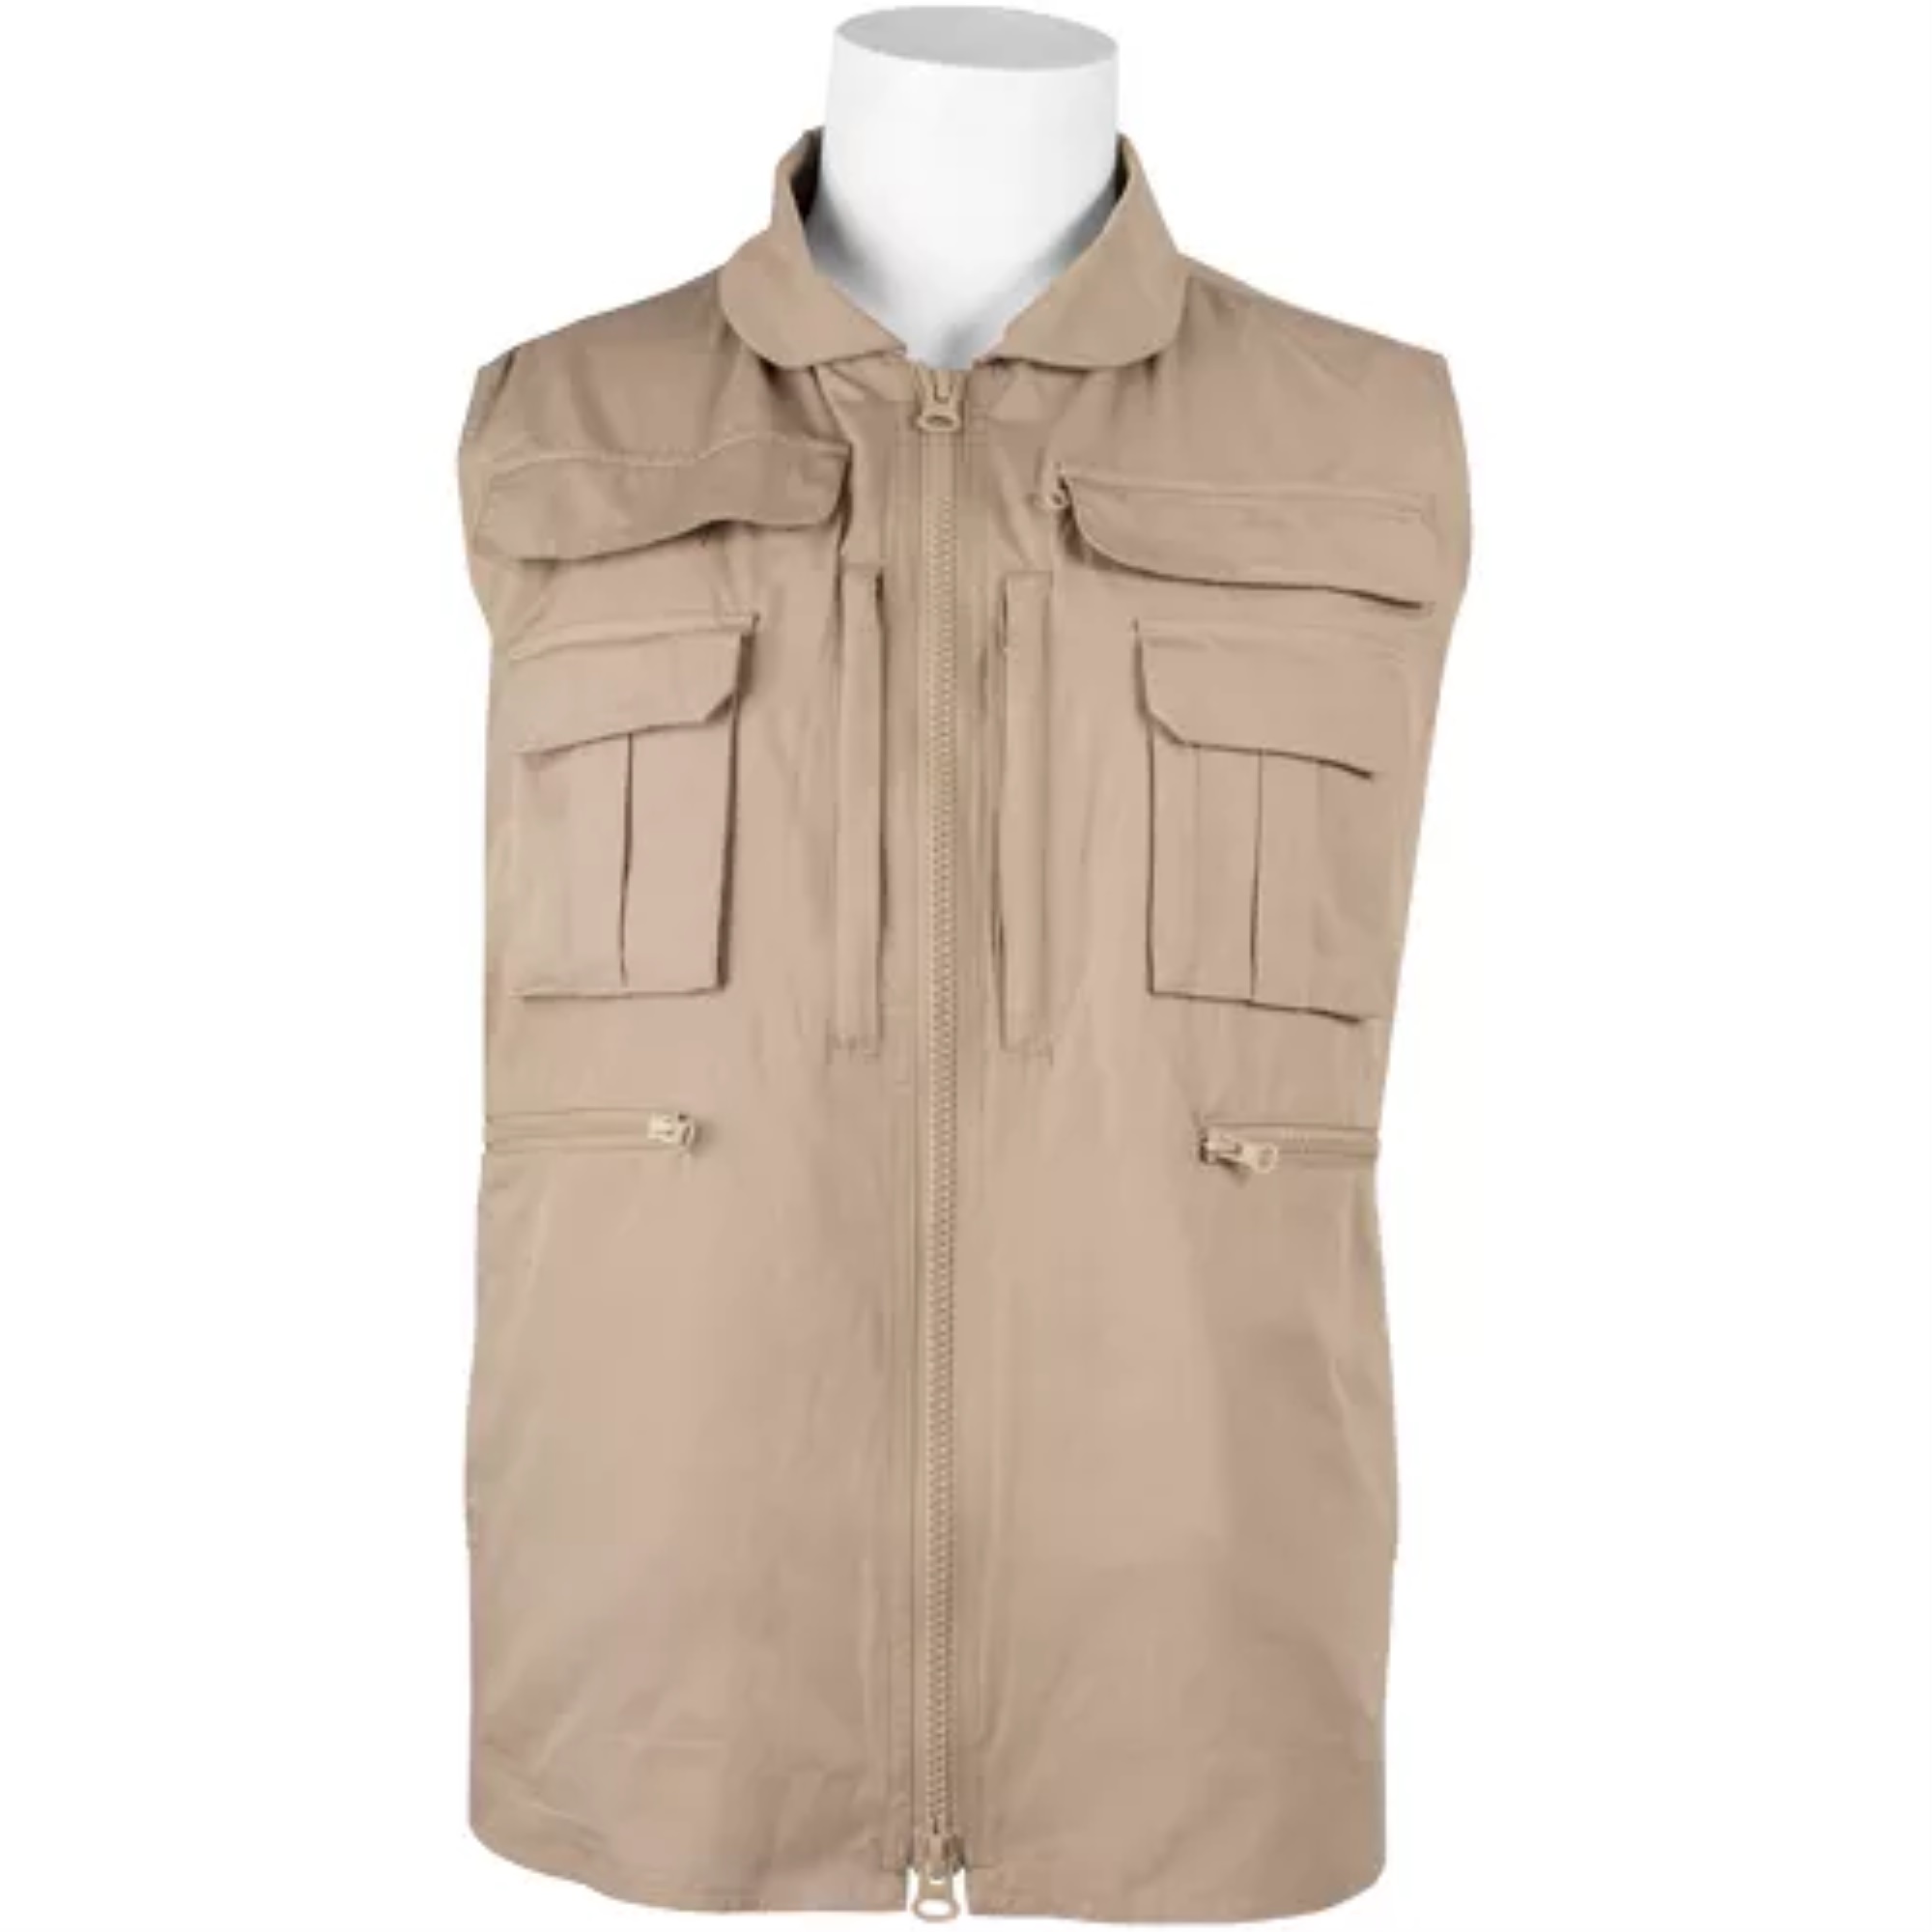 Fox Outdoor Products Viper Concealed Carry Vest Khaki - 3XL